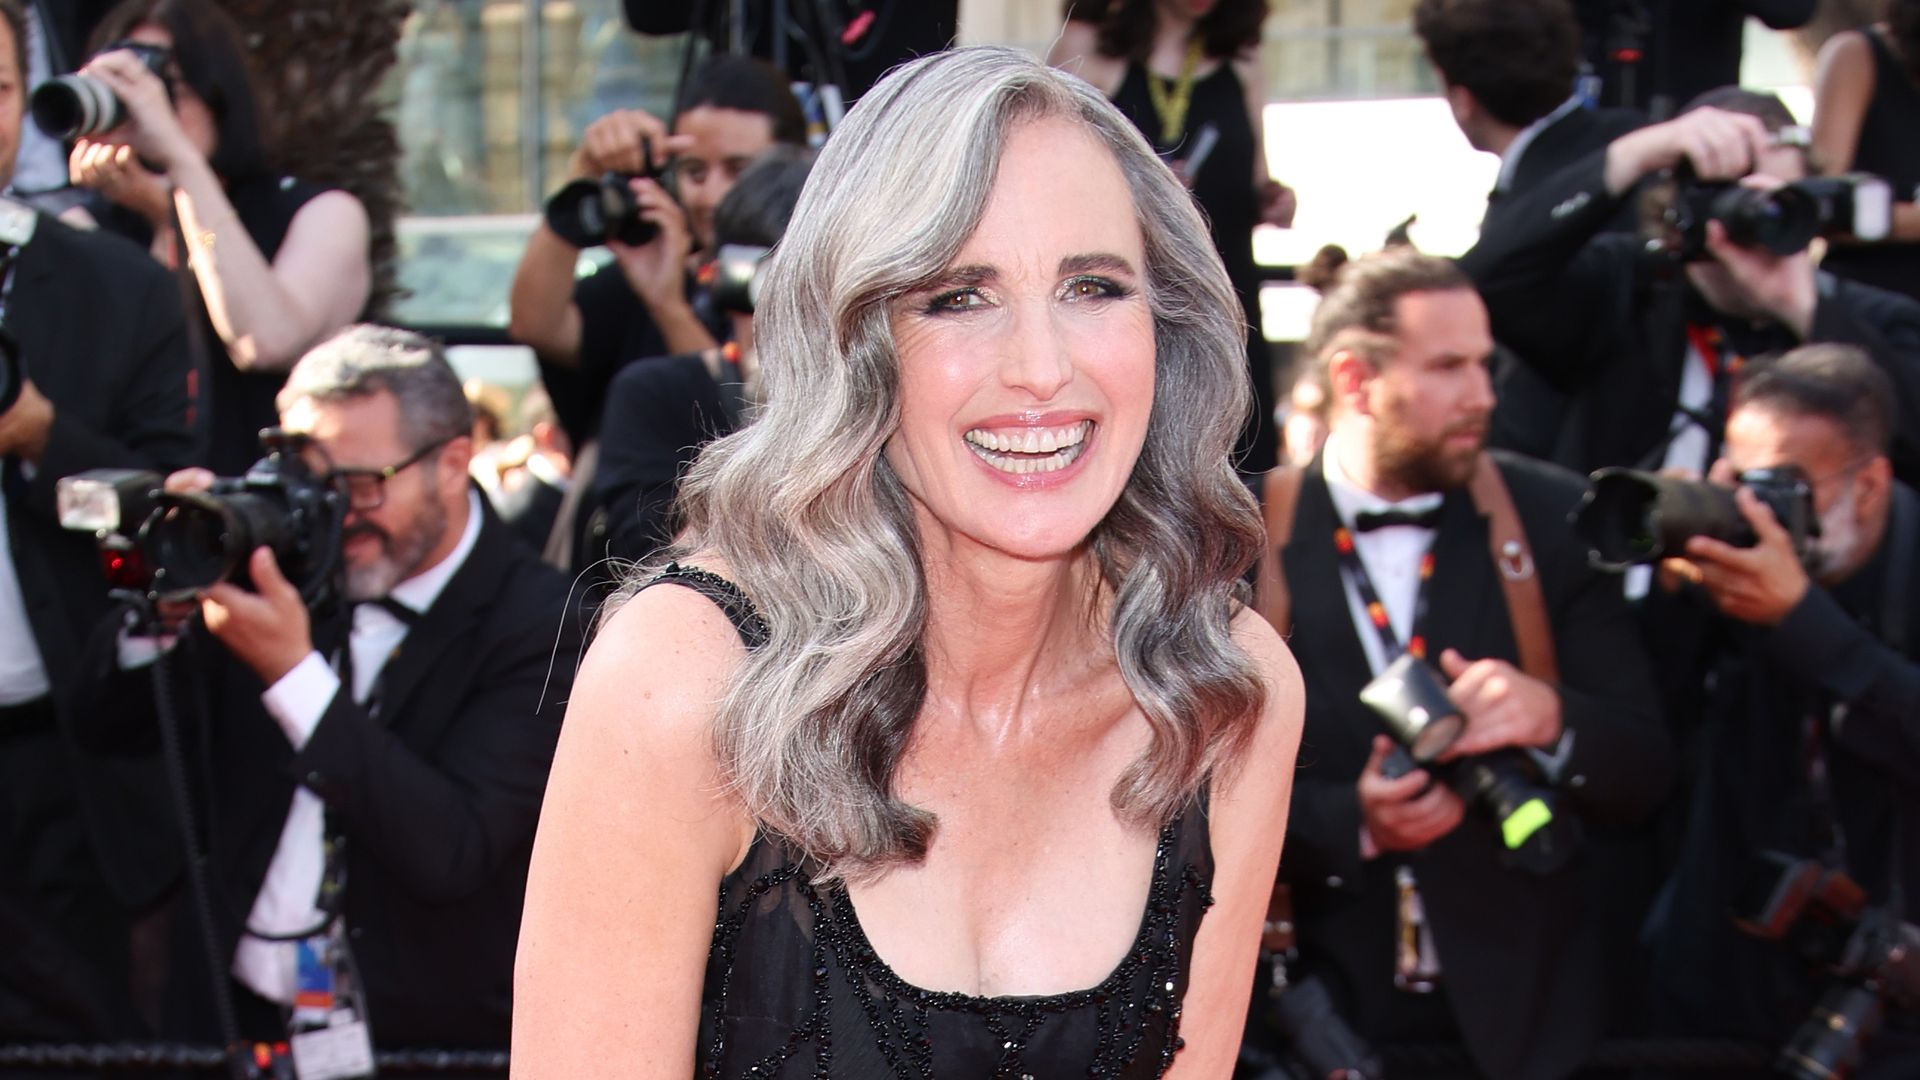 Meet Andie MacDowell's famous children – and you'll definitely recognize them